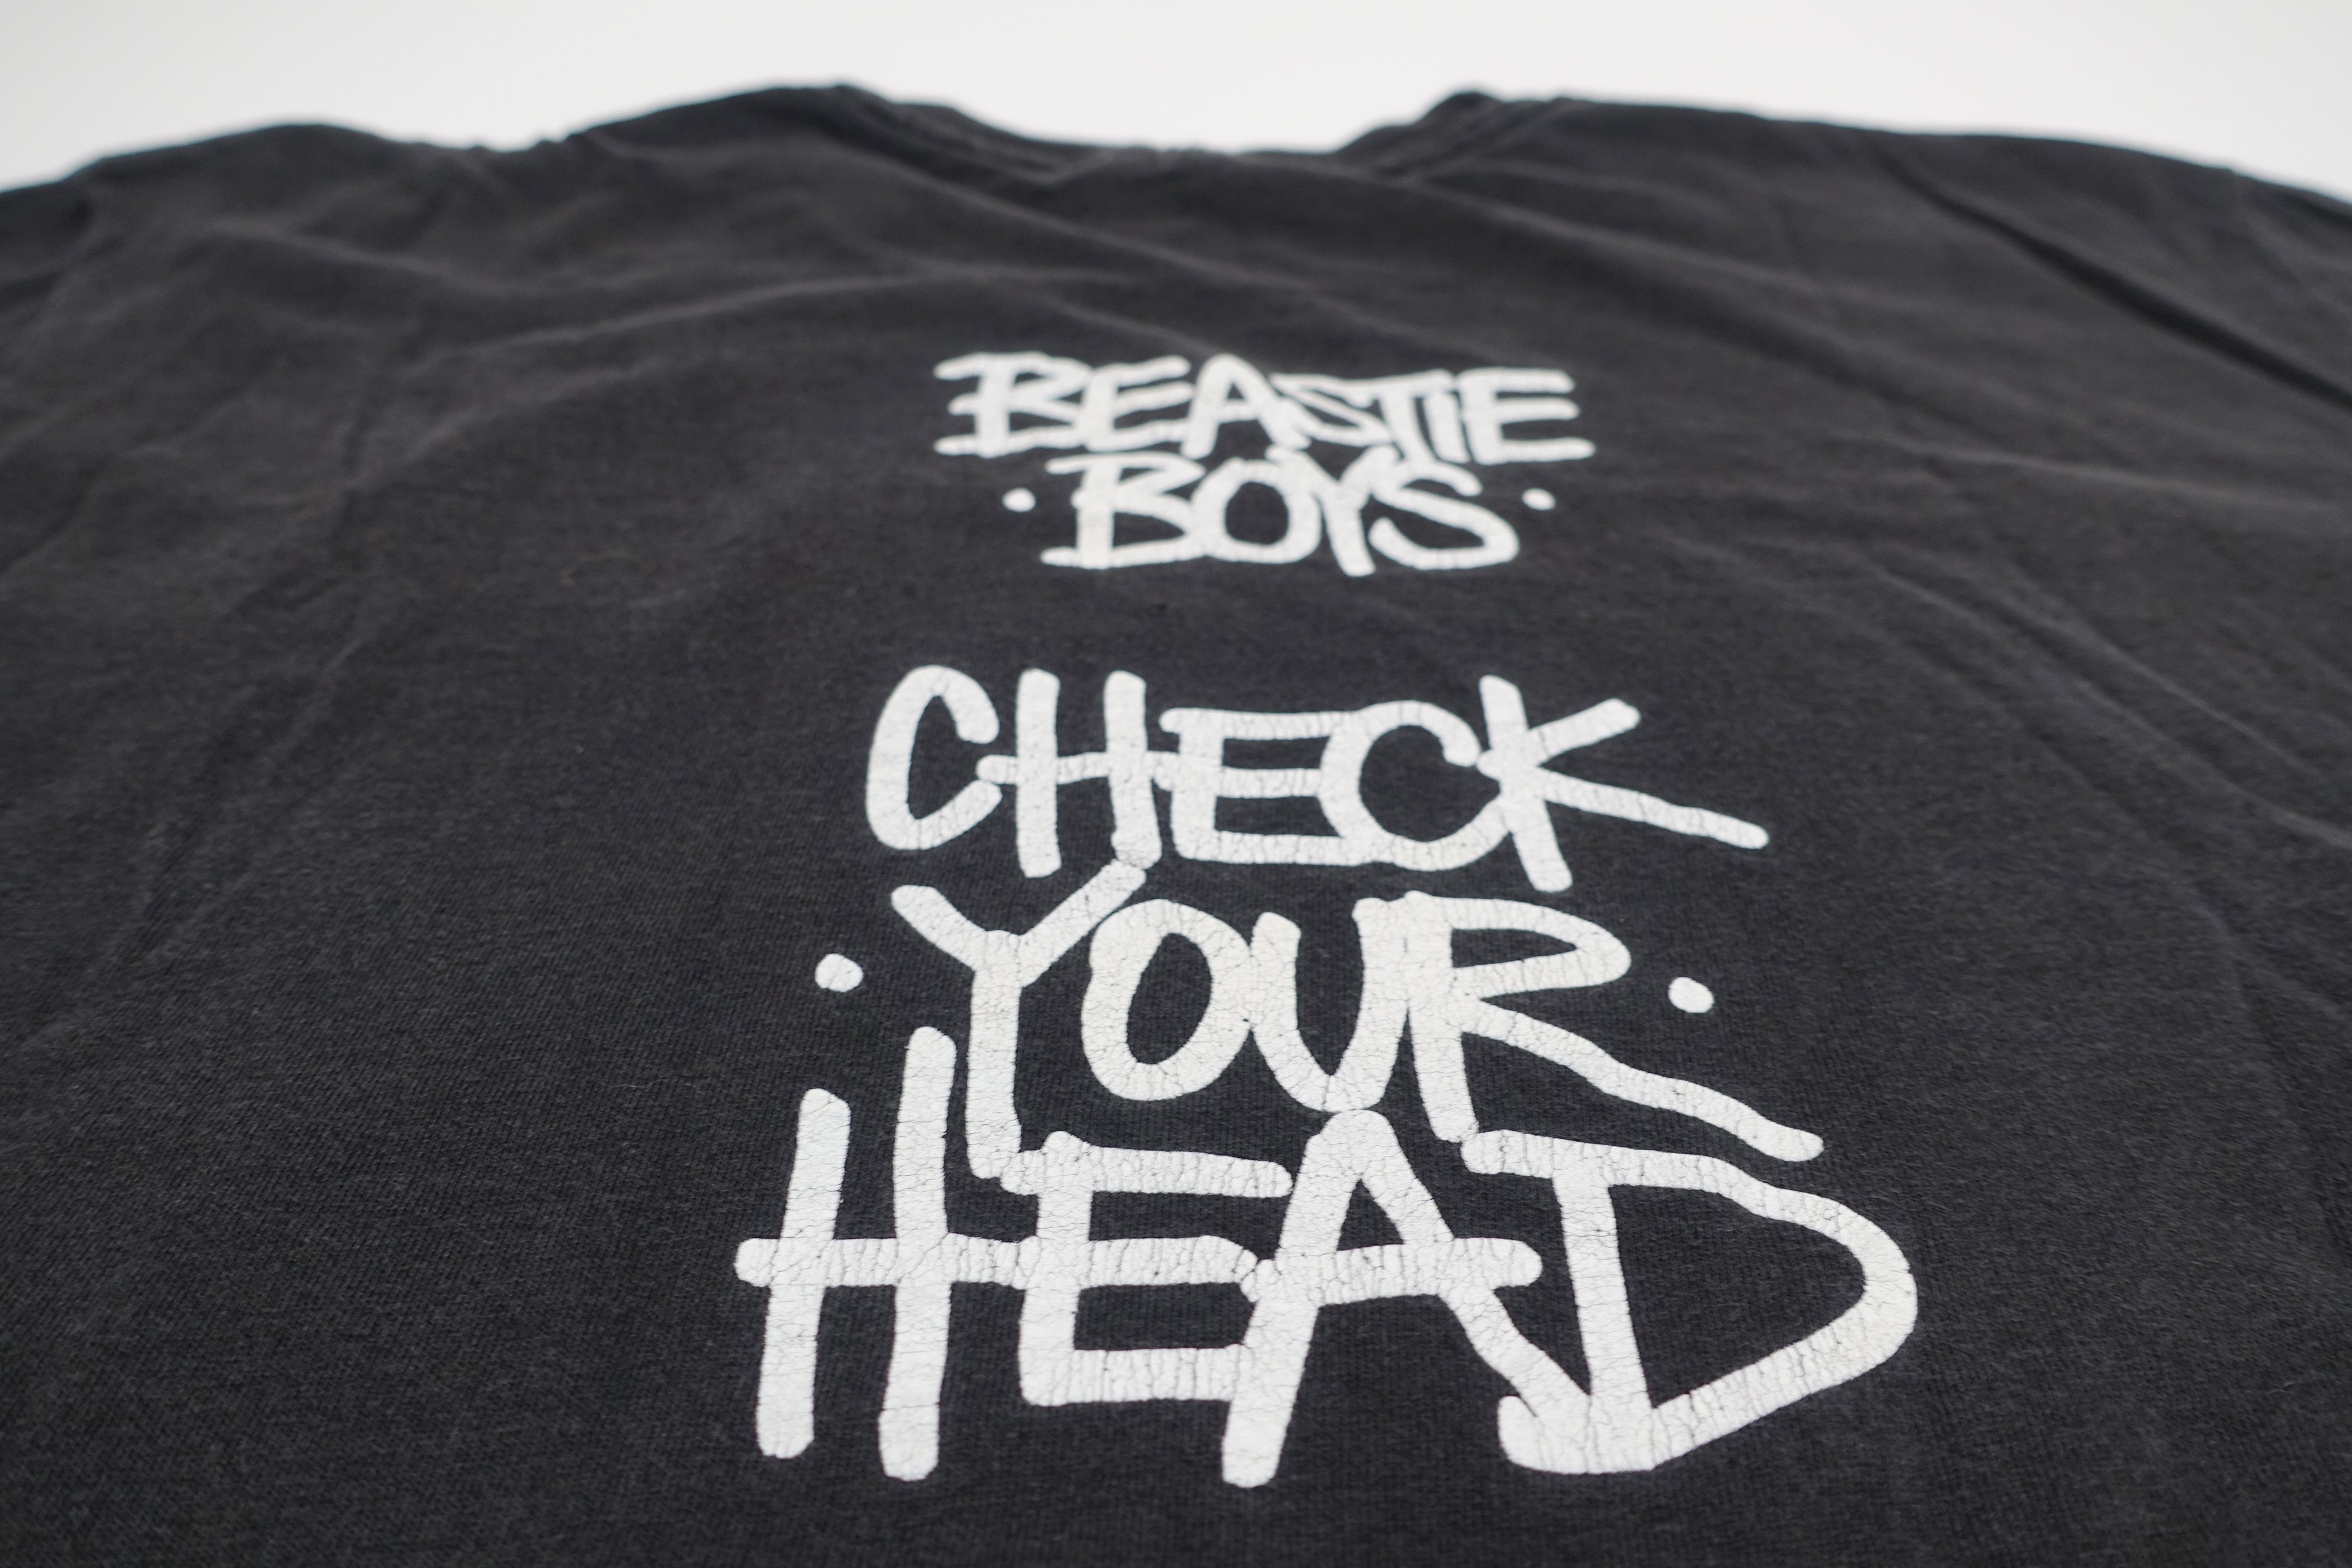 Beastie Boys - Check Your Head 1992 Tour Shirt Size Large